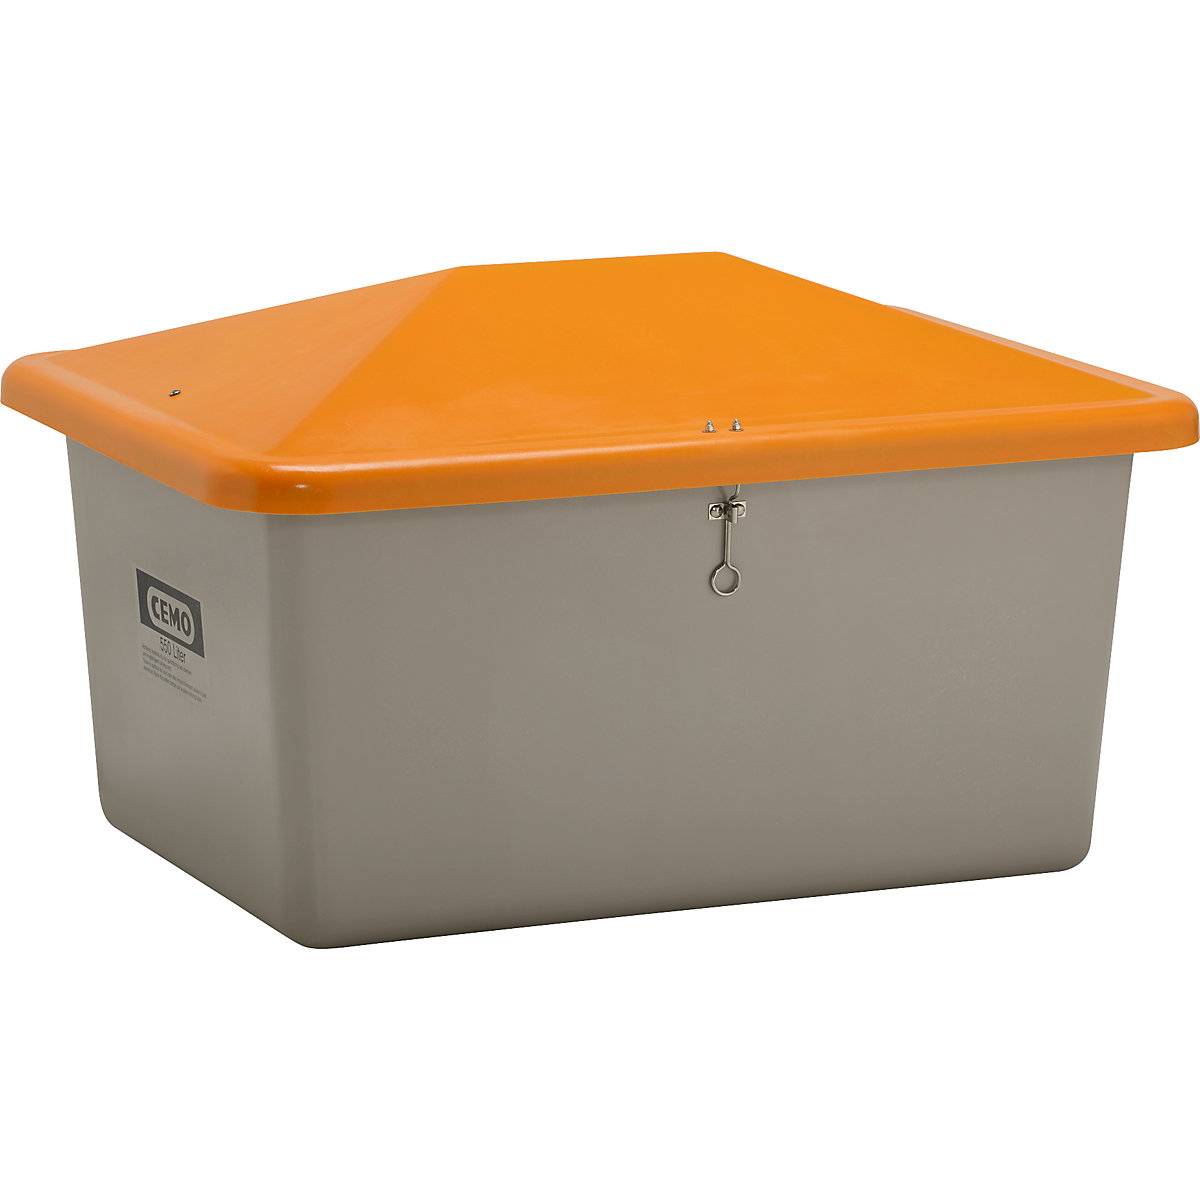 Grit container made of GRP - CEMO